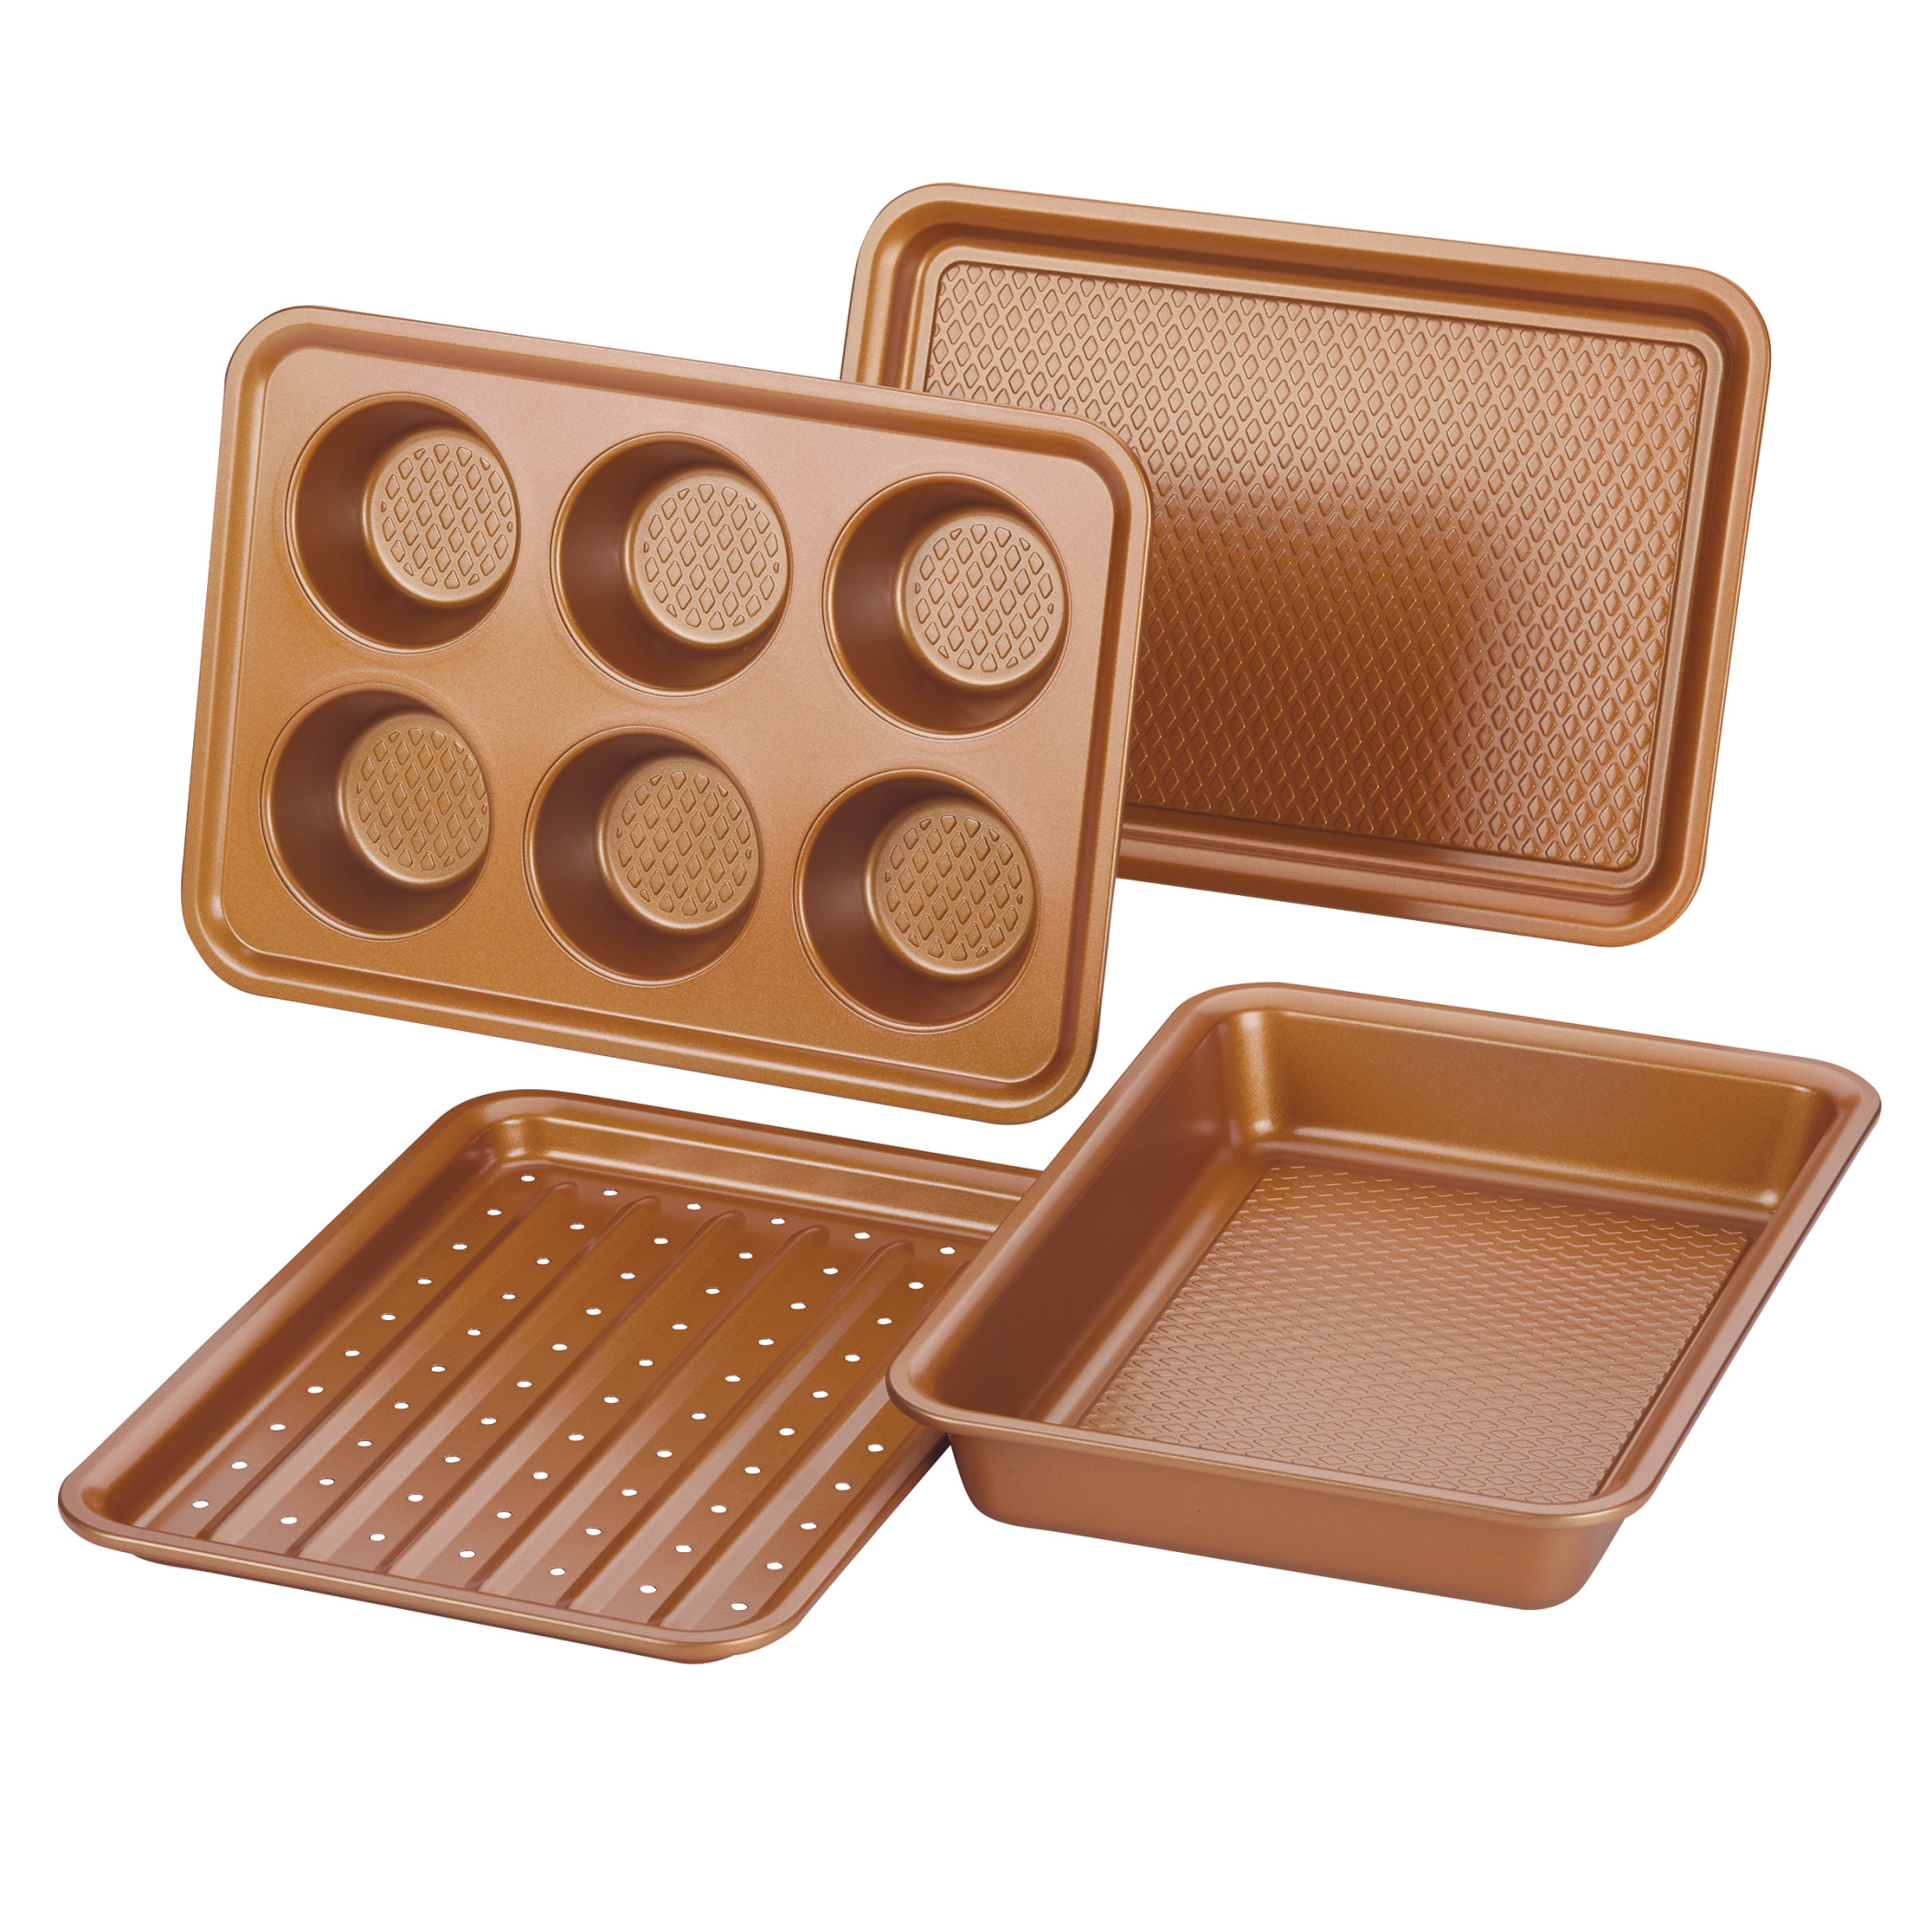 Ayesha Curry 4-Piece Bakeware Toaster Oven Baking Set, Copper - image 1 of 11